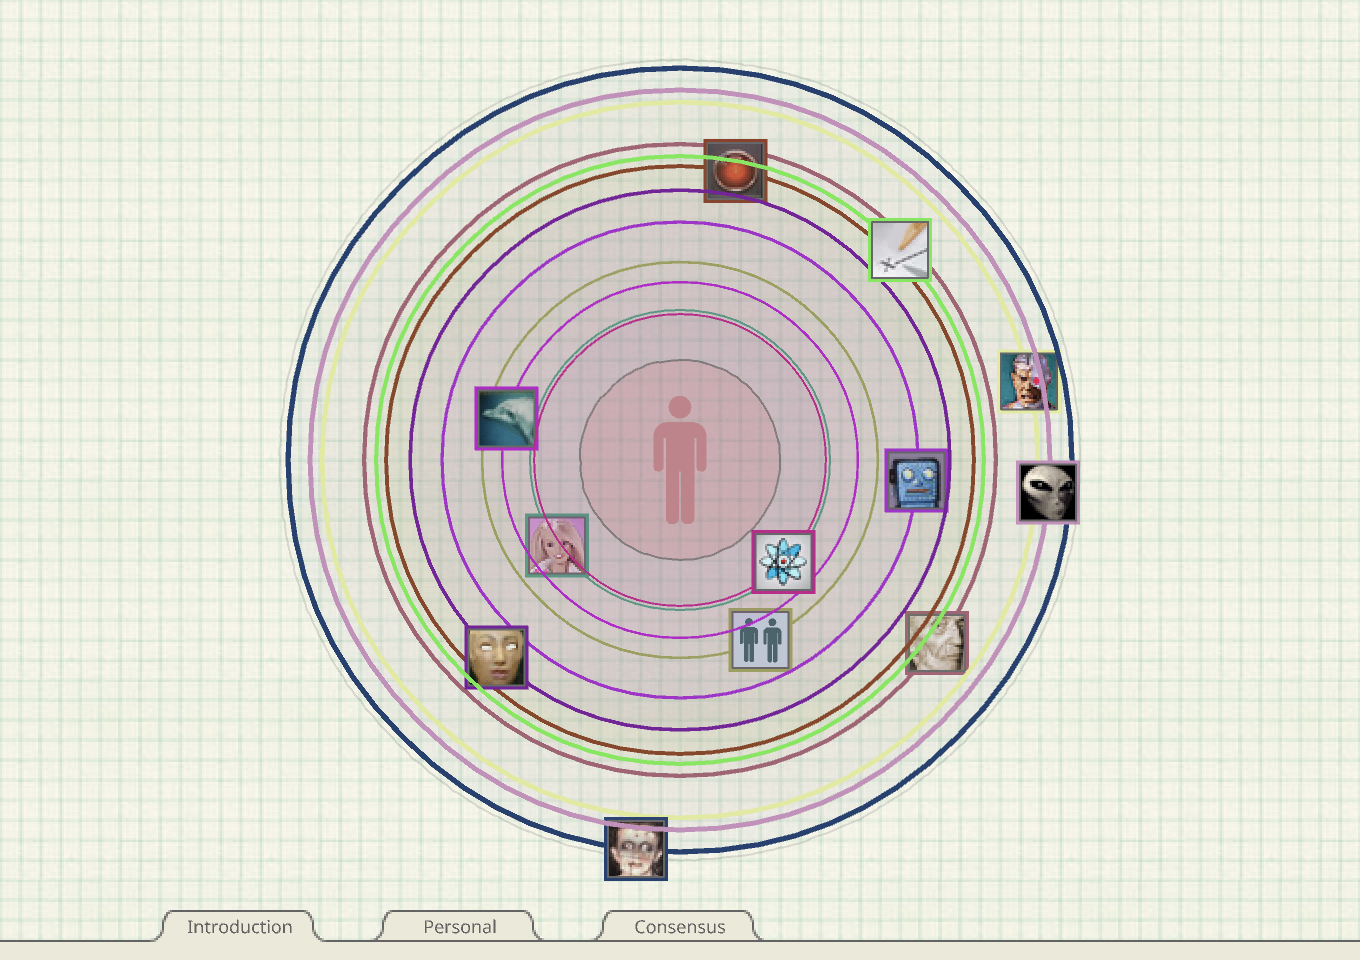 Square images orbit on colored lines in a circle around simple human figure at the center in pink.